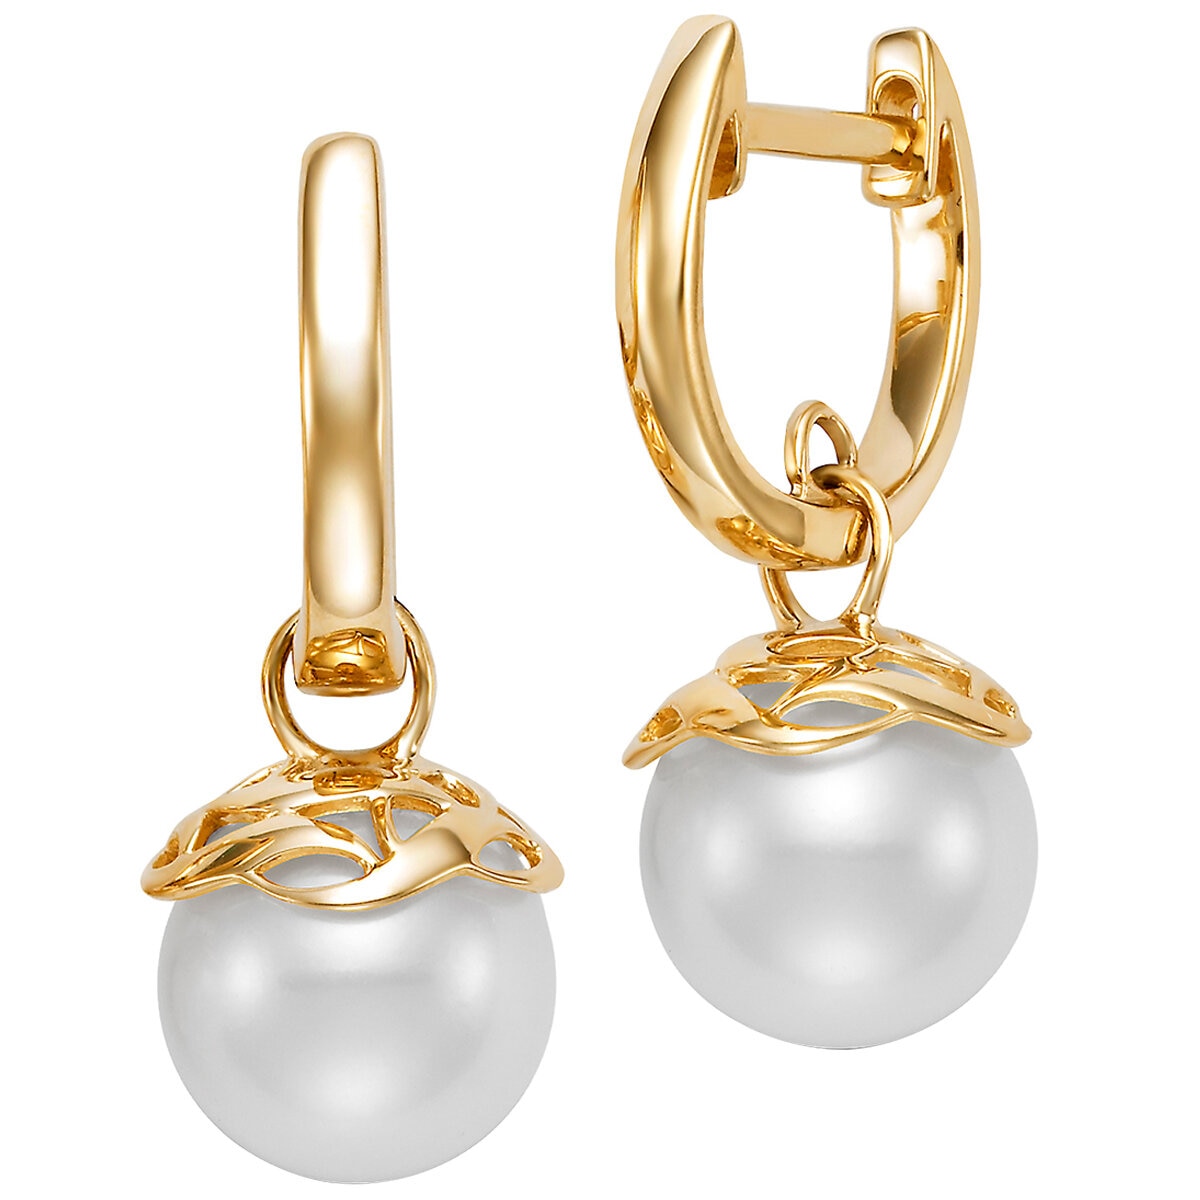 14KT Yellow Gold 9.0-9.5mm Cultured Freshwater Pearl Earring